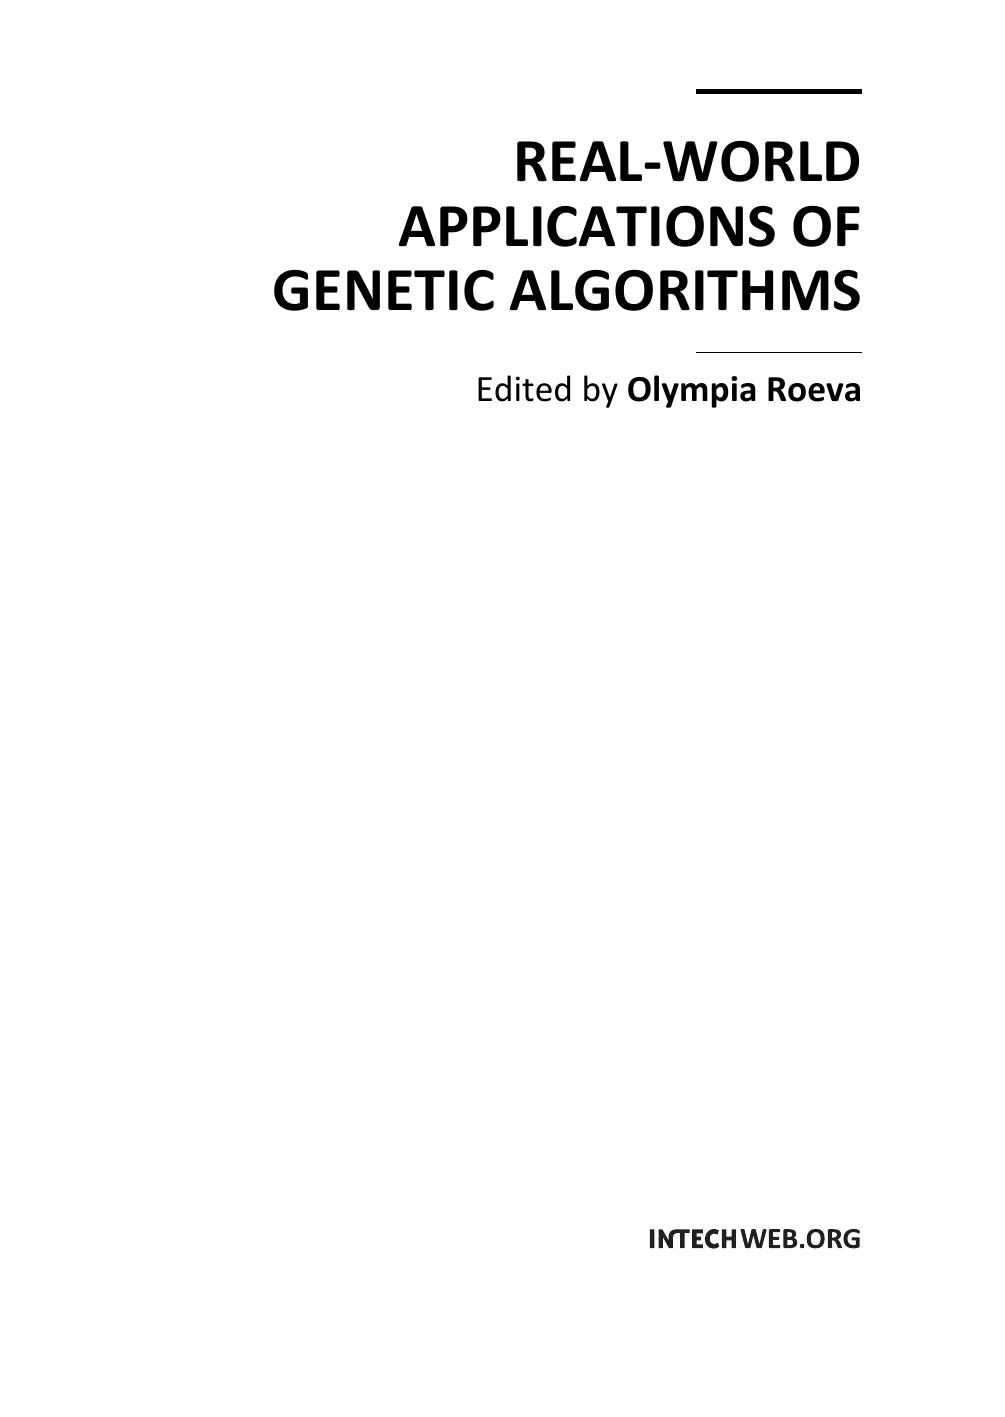 Real-World Applications of Genetic Algorithms 2012.pdf